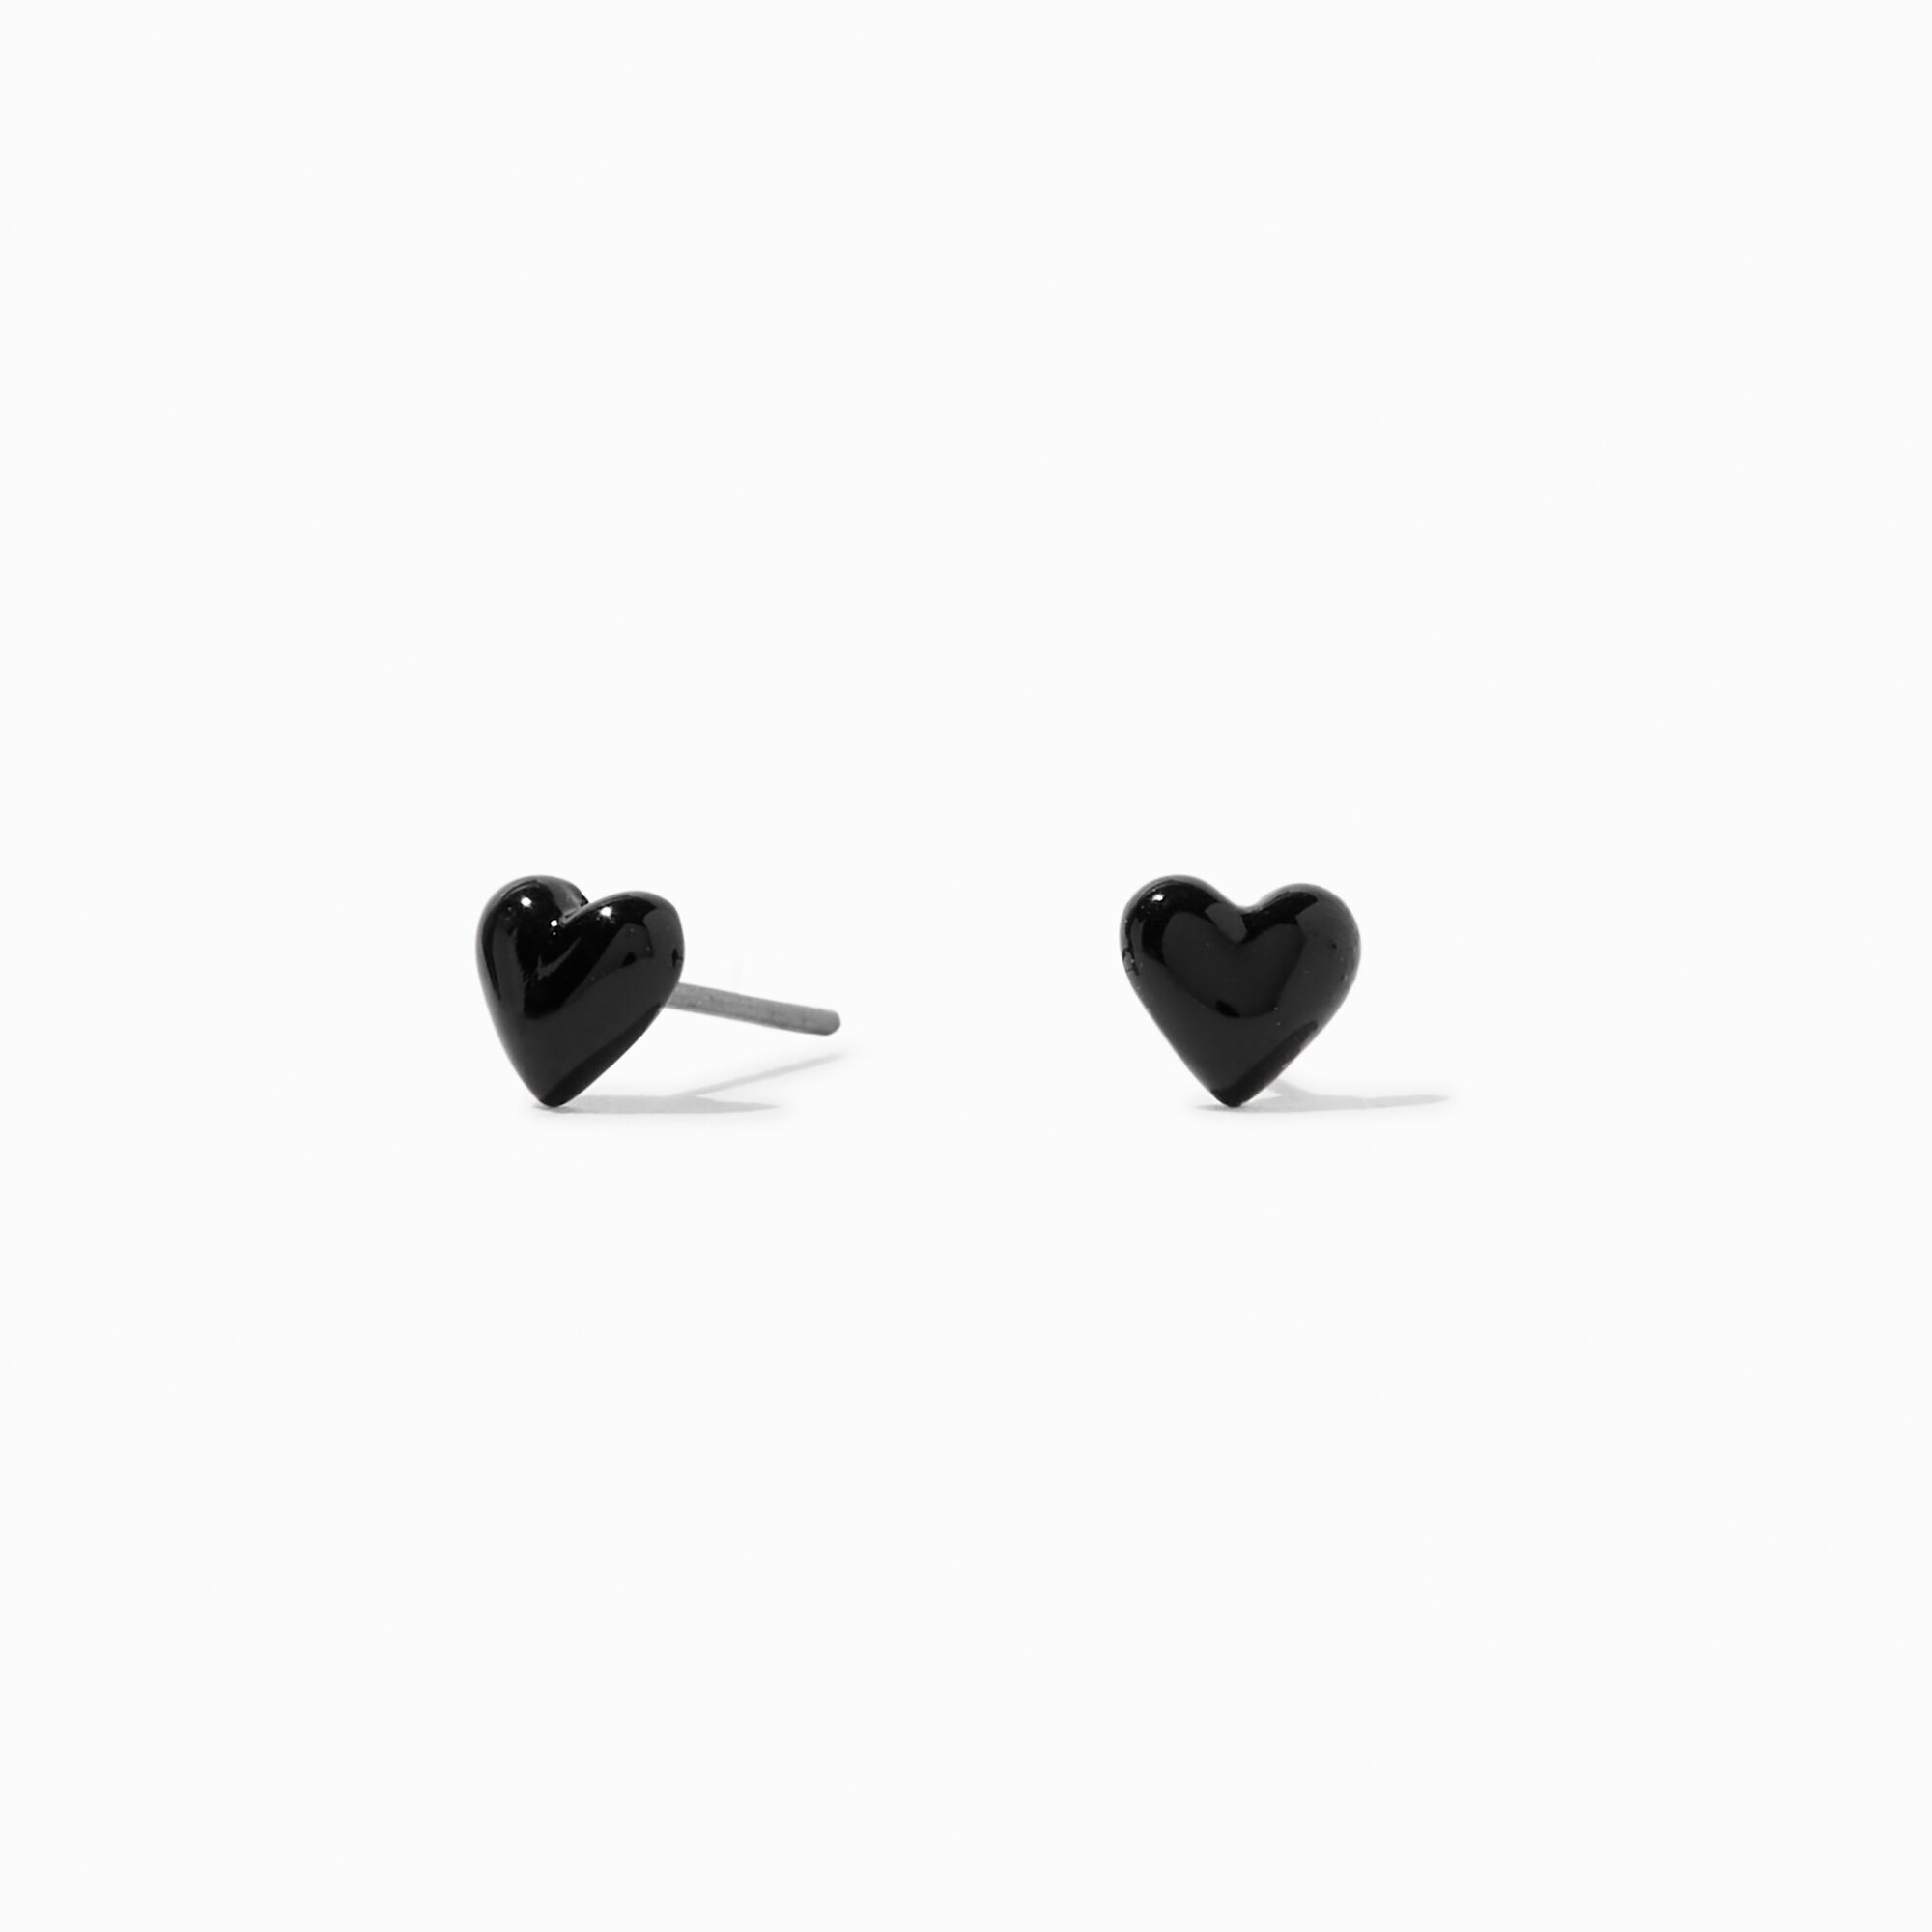 View Claires Puffy Heart Stud Earrings Black information